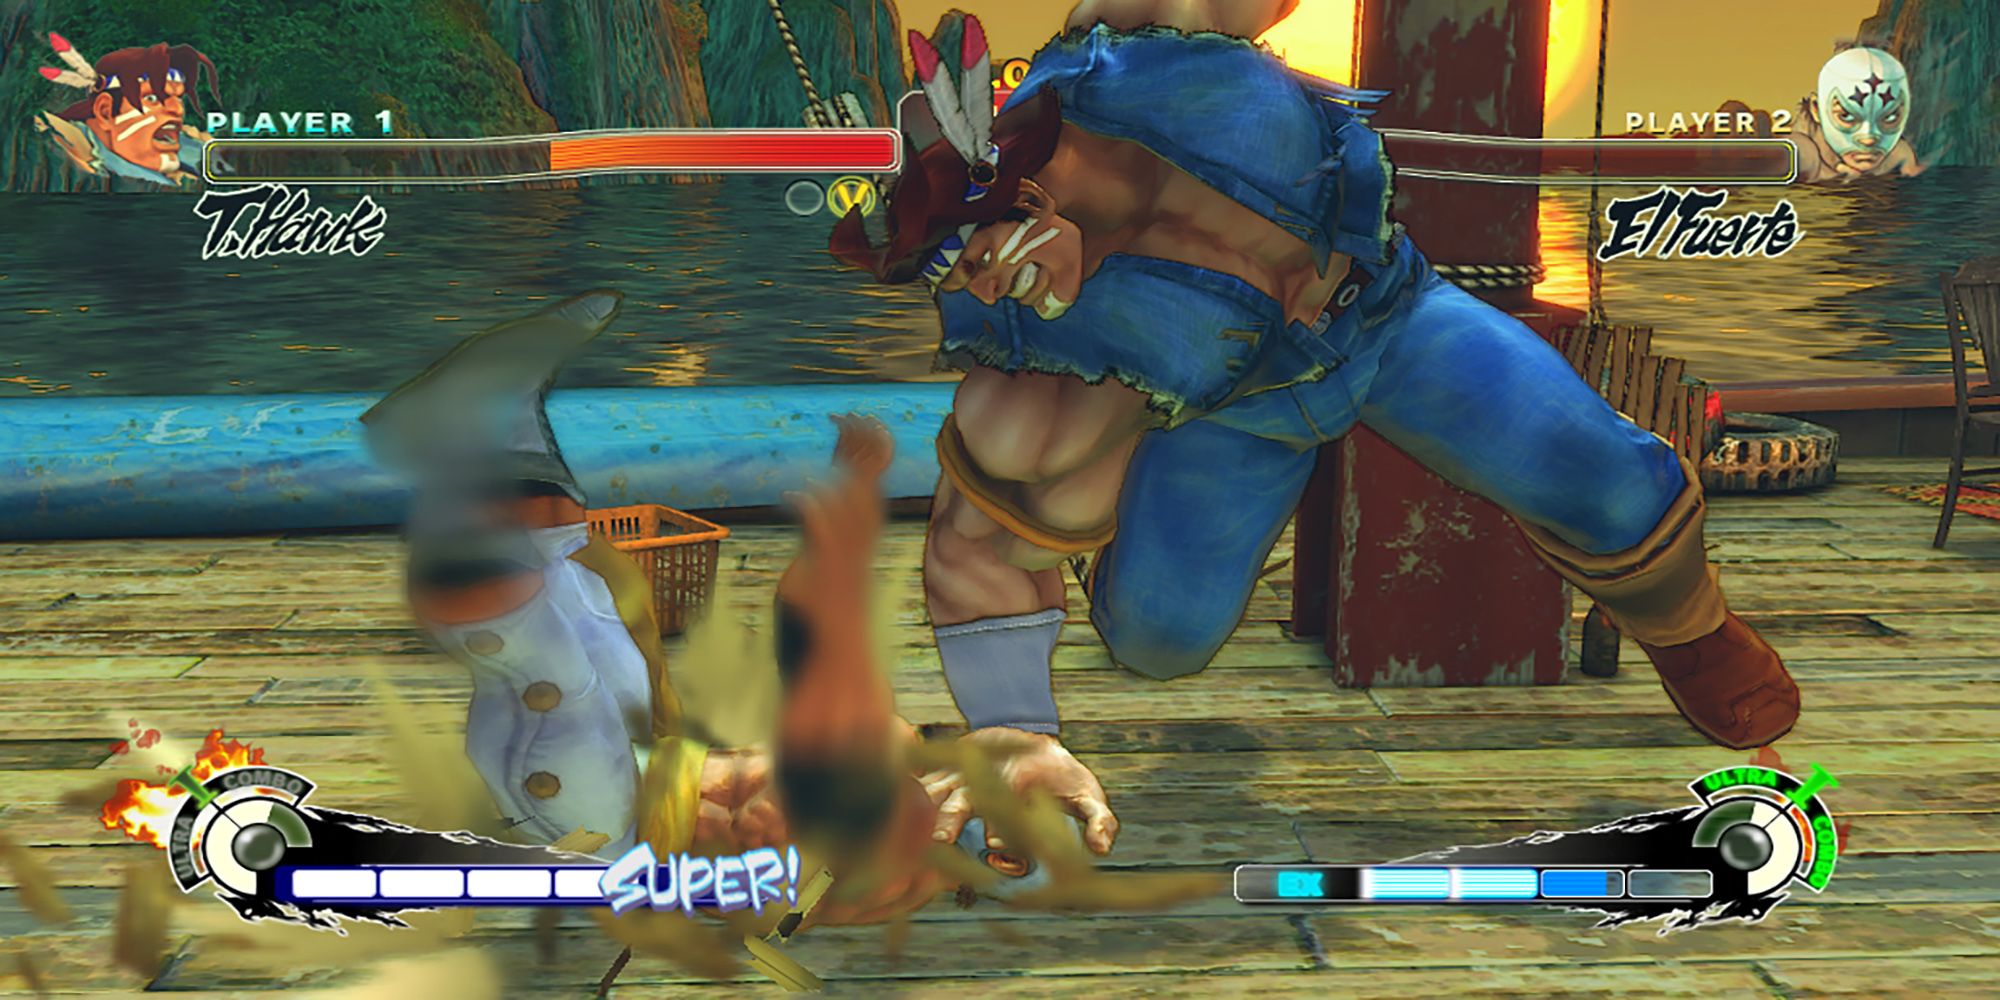 T Hawk strikes down El Fuerte during a match on a raft in Super Street Fighter 4.